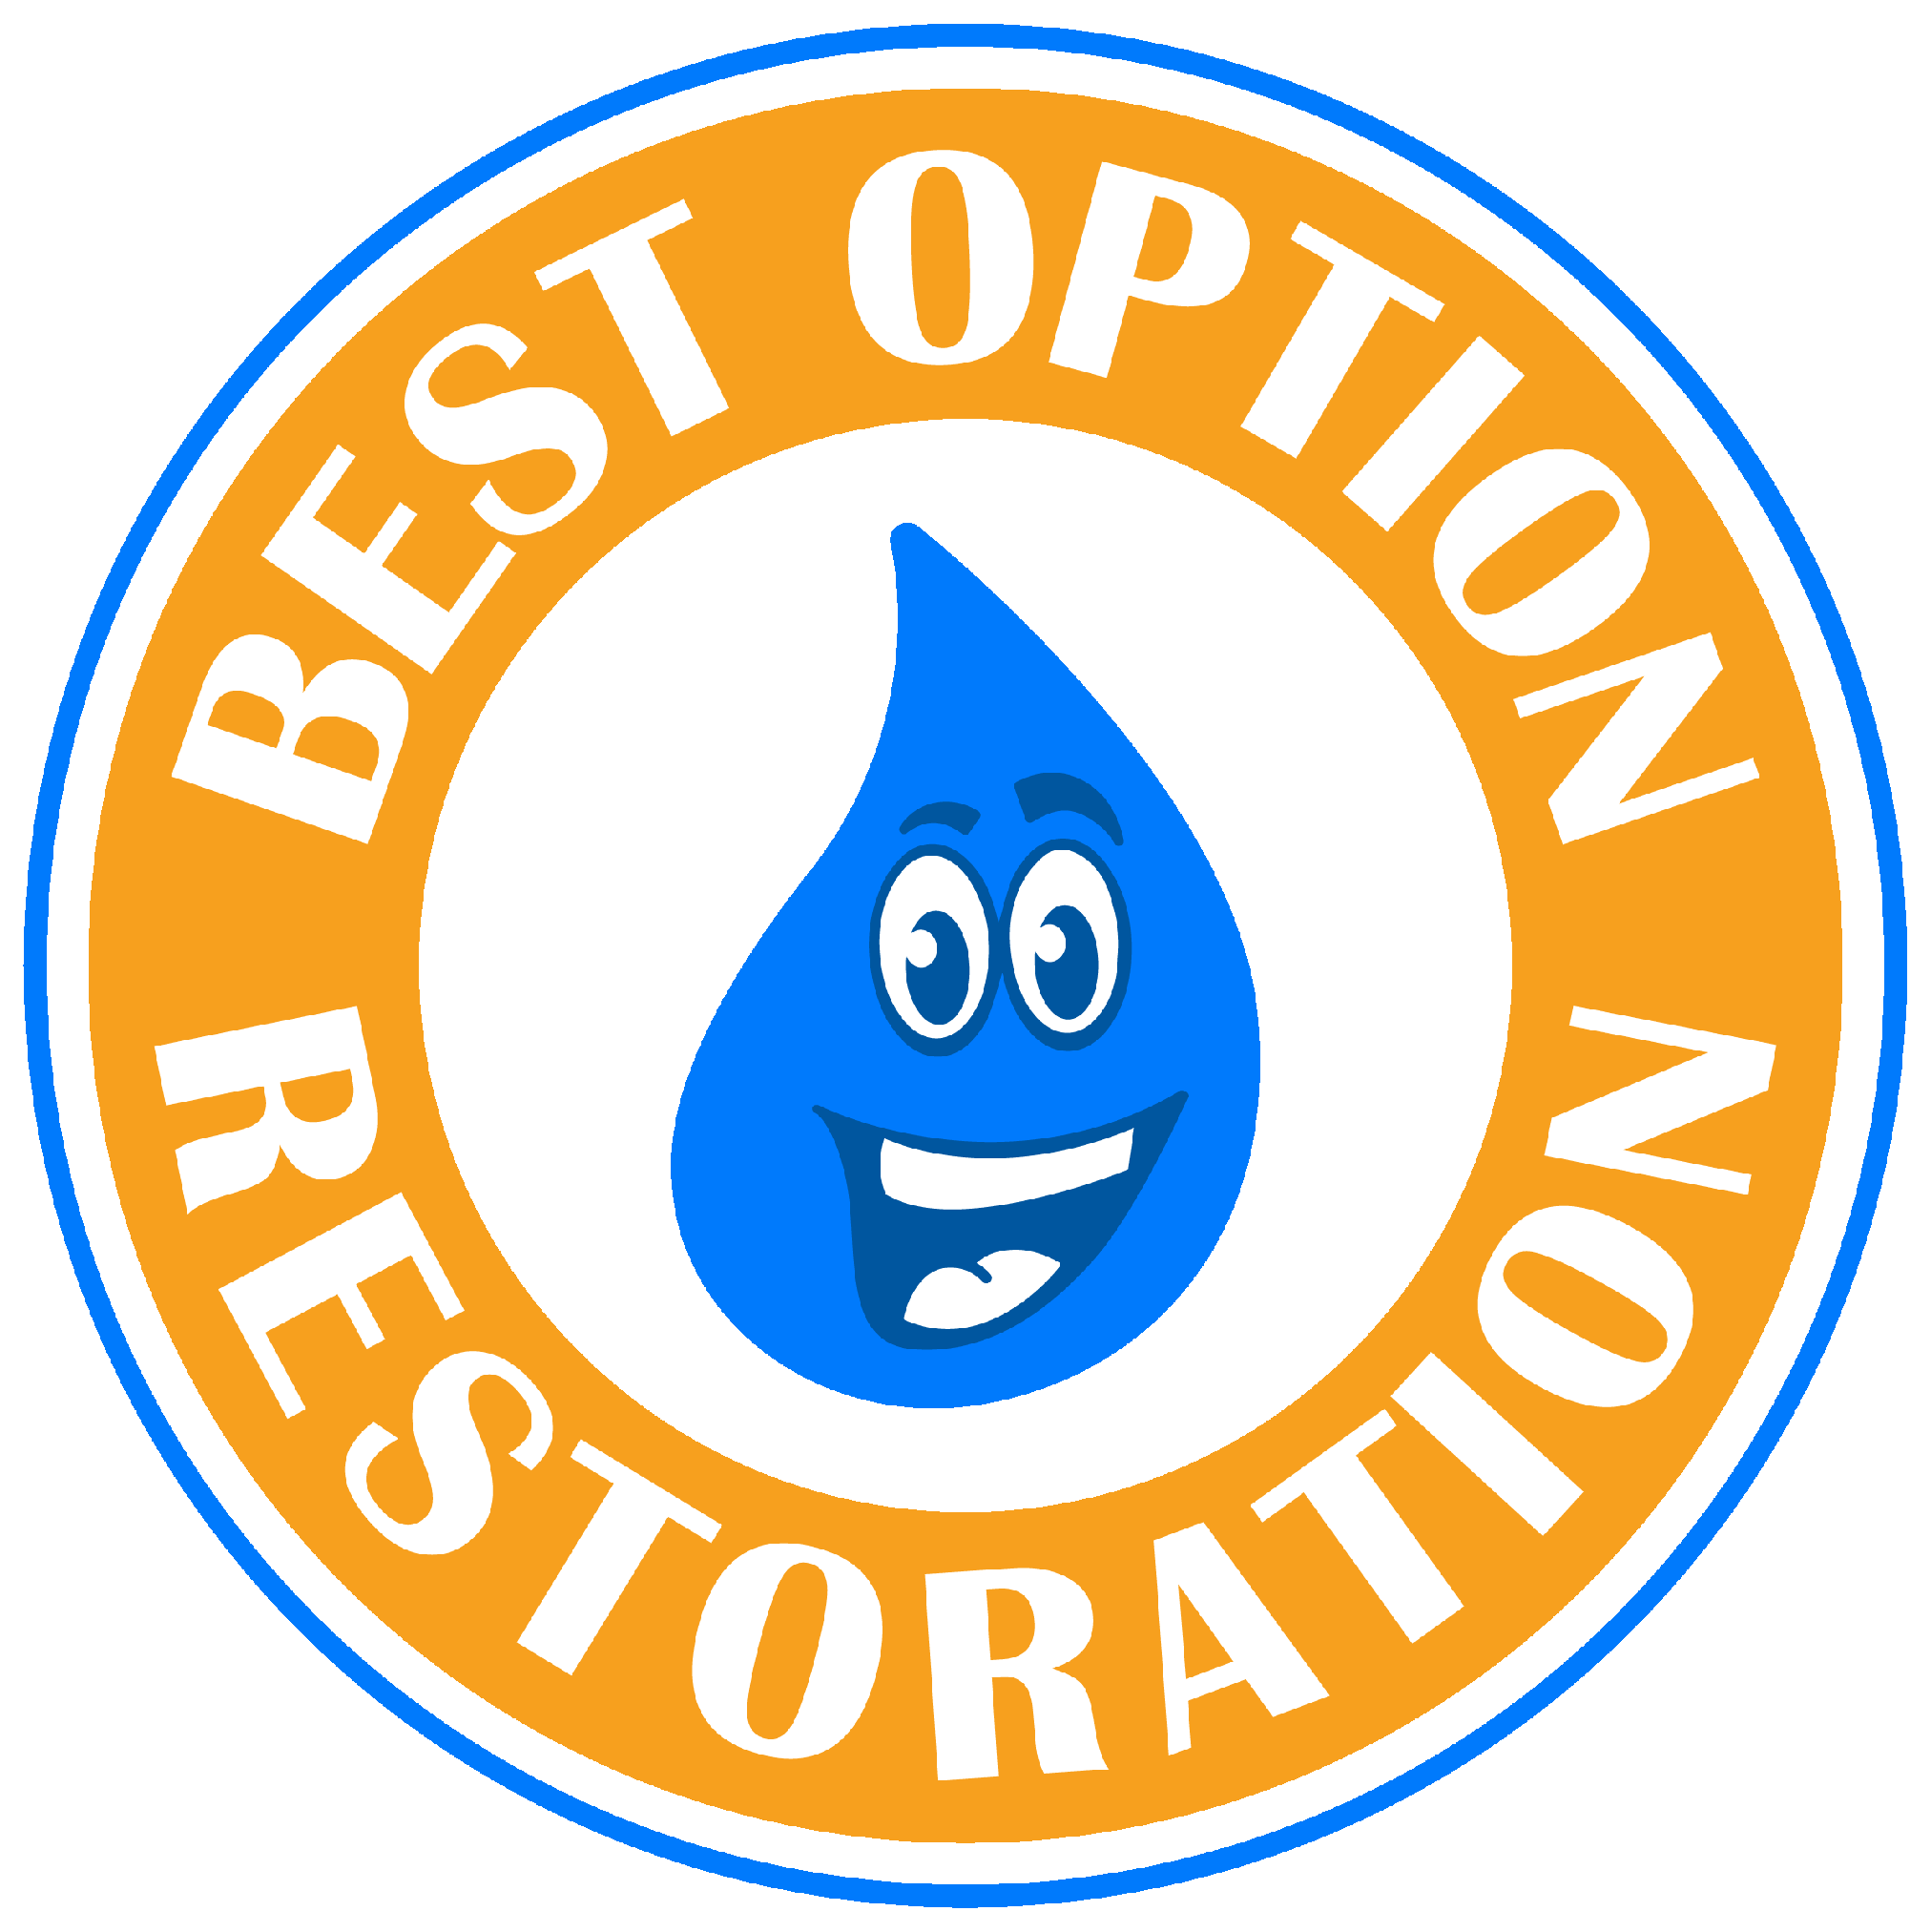 Contents Restoration Company, Water Damage Repair Service in Denver, CO